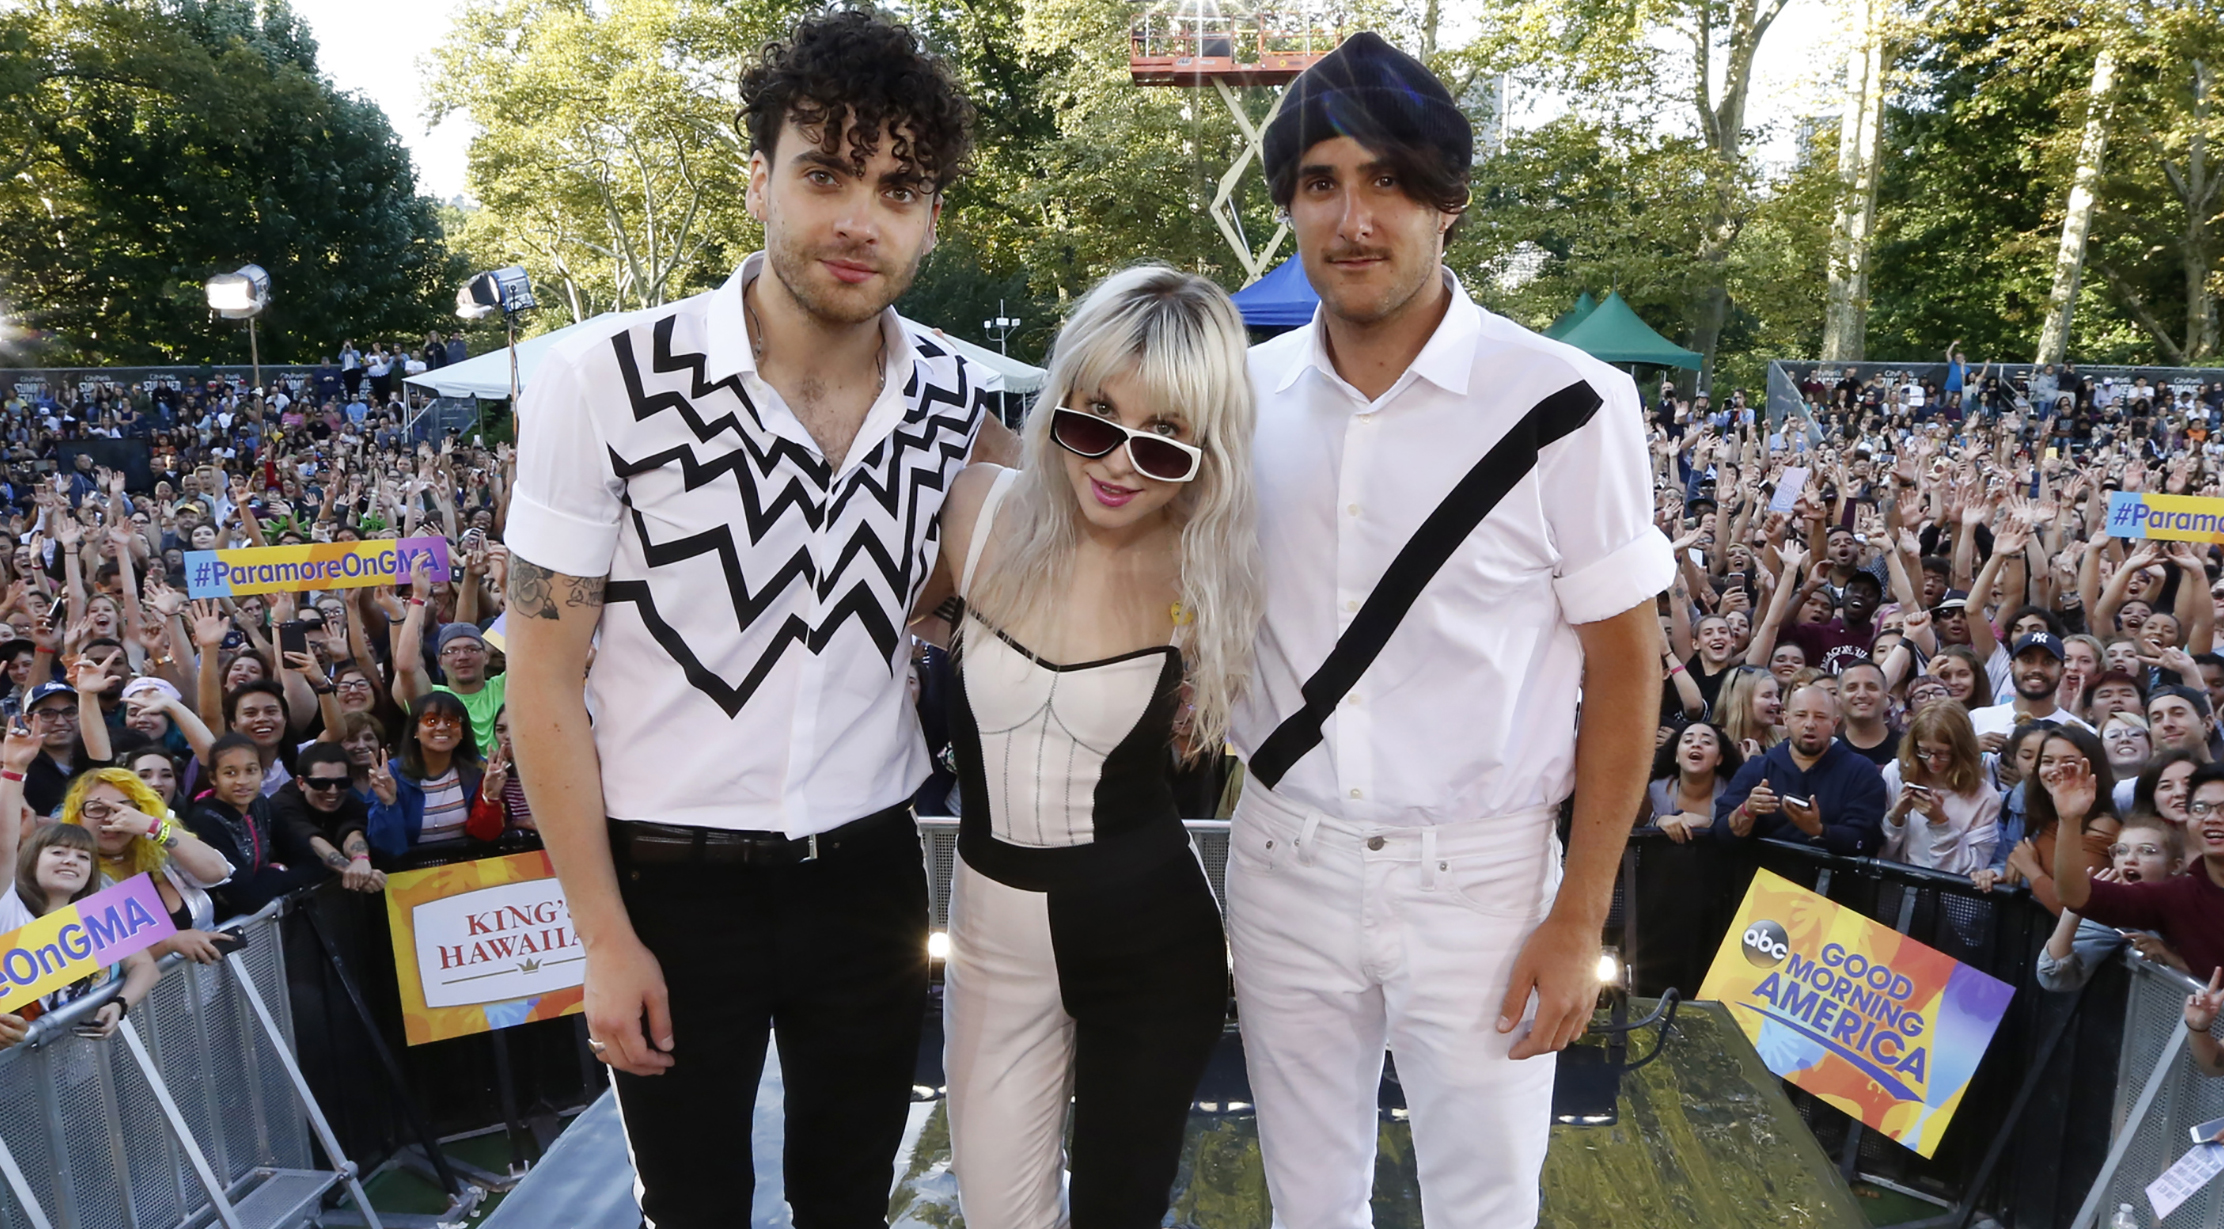 https://thefortyfive.com/wp-content/uploads/Paramore-Getty.jpg